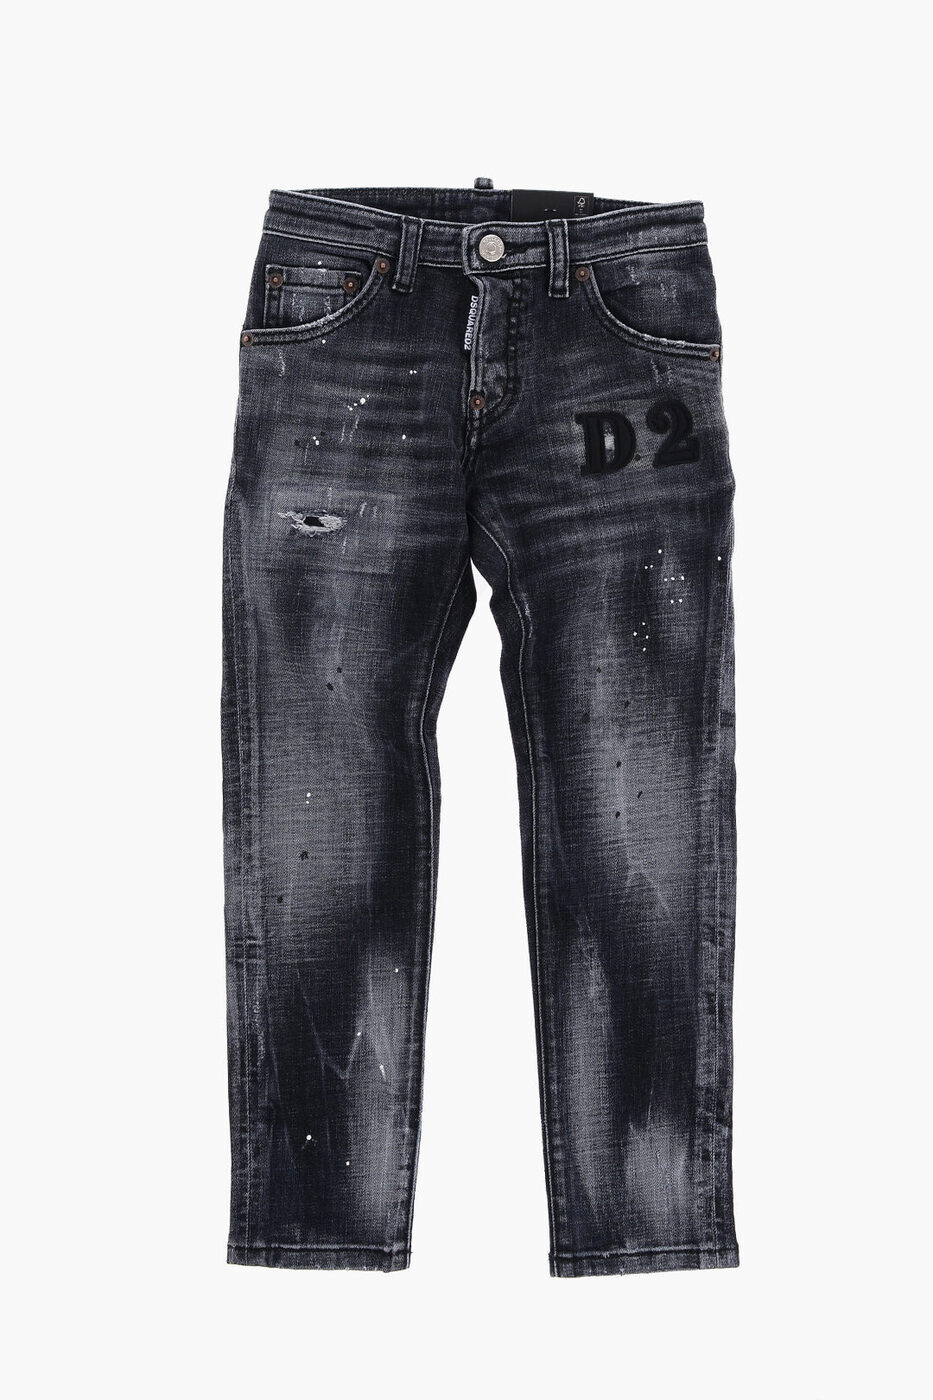 DSQUARED2 ディースクエアード デニム DQ0236 D0A2H DQ02 ボーイズ EFFETTO VINTAGE COOL GUY JEANS 【関税・送料無料】【ラッピング無料】 dk